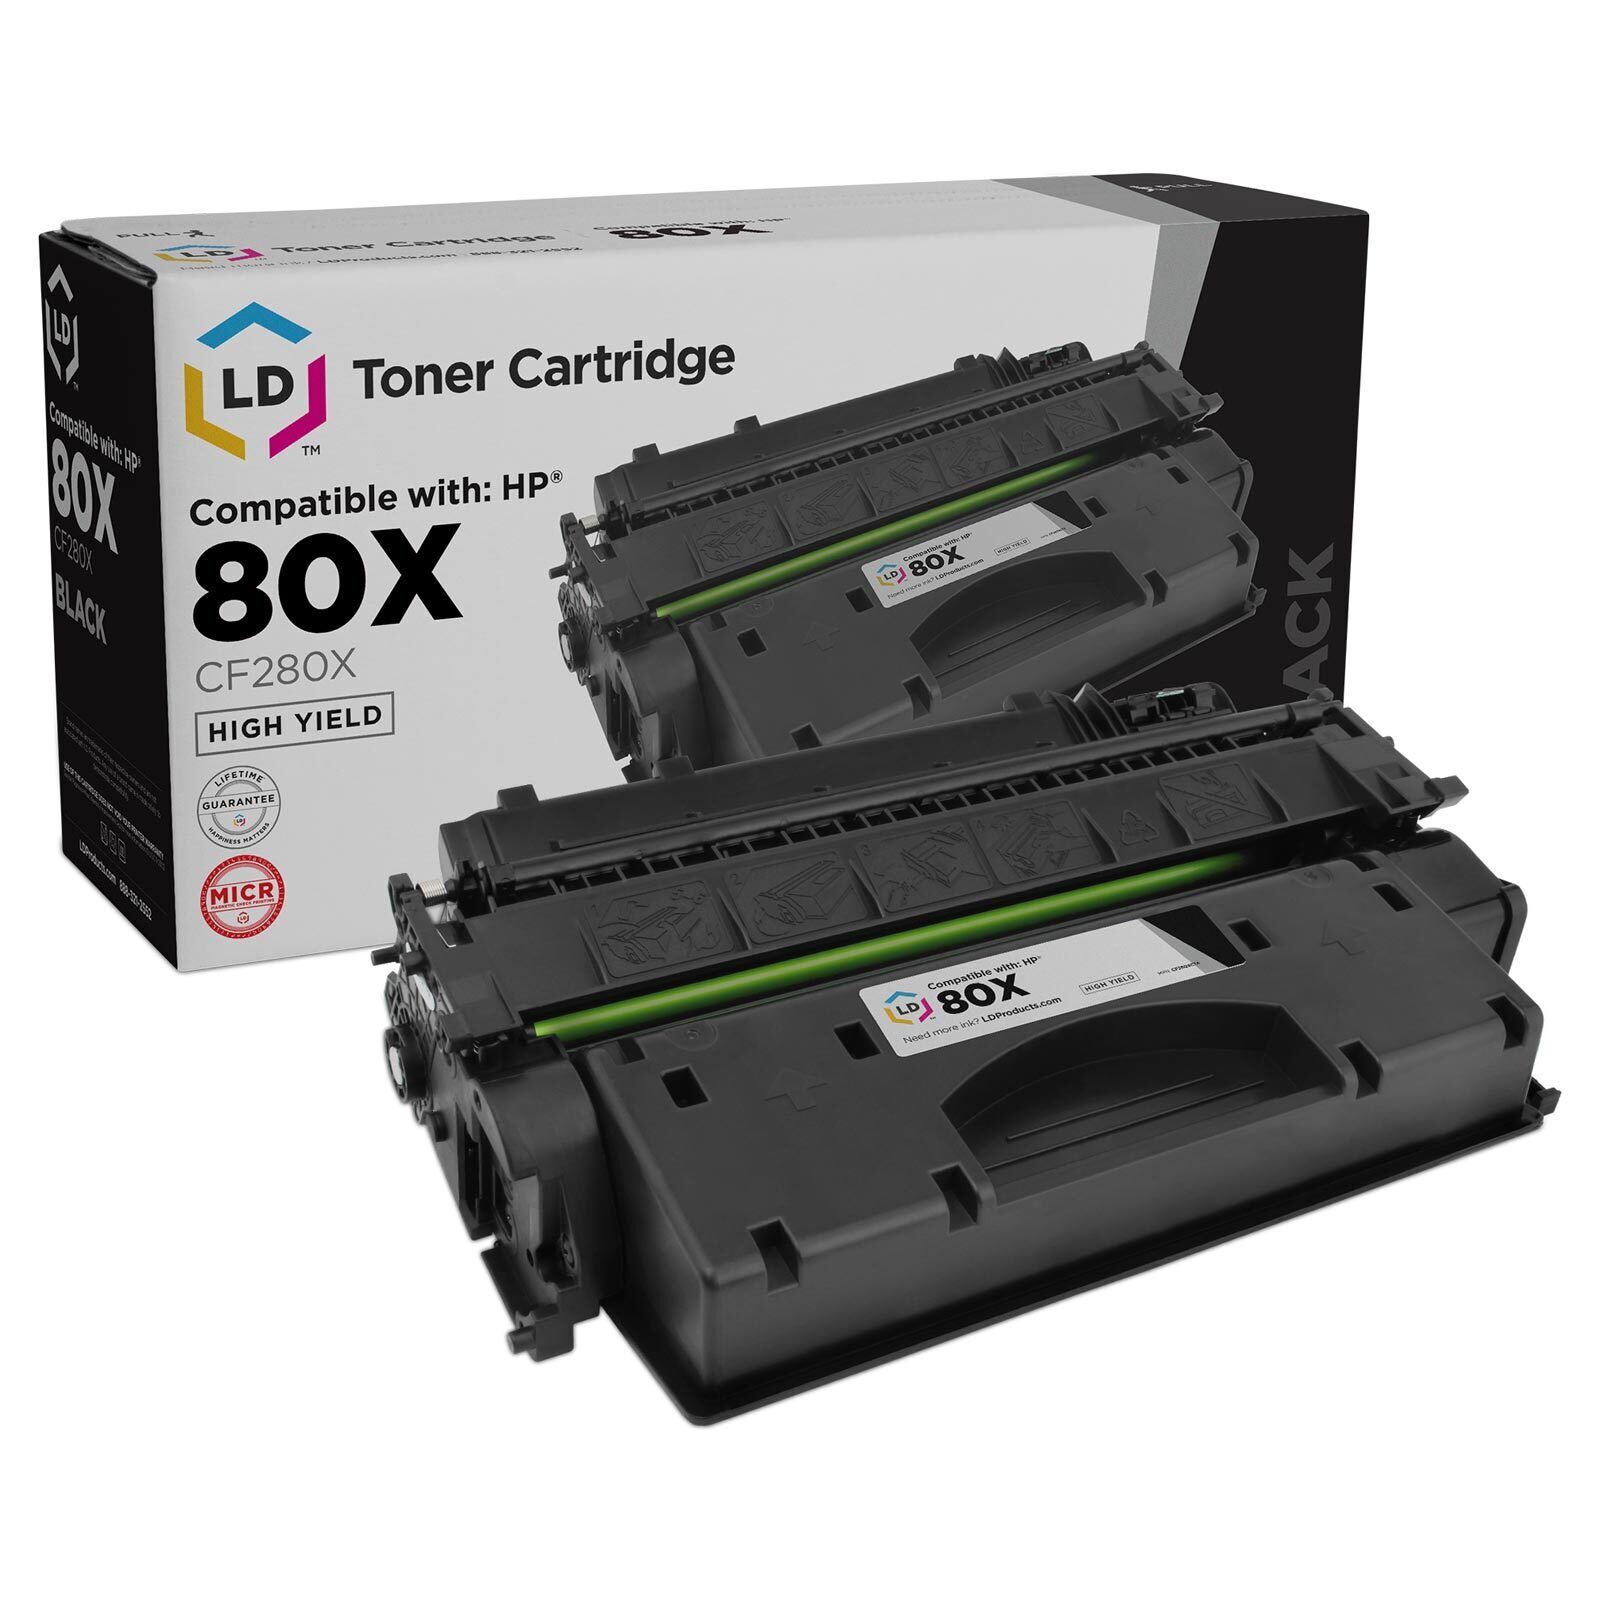 LD Products Replacement for HP 80X MICR Toner Cartridge CF280X 80A CF280A HY